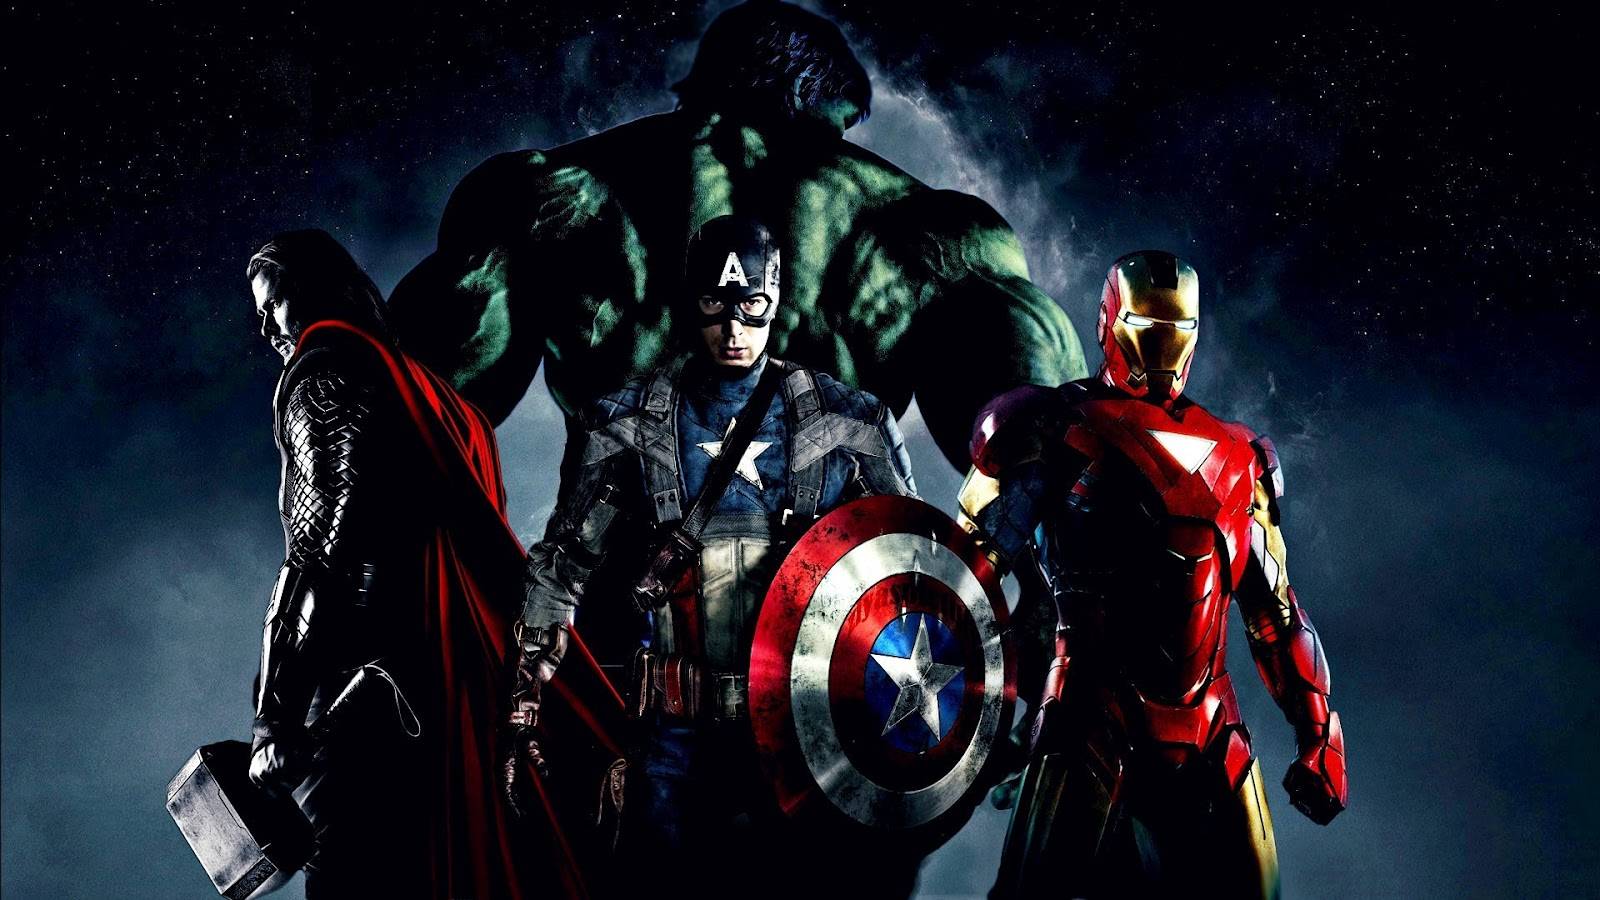 The Avengers Your Geeky Wallpapers HD Wallpapers Download Free Map Images Wallpaper [wallpaper684.blogspot.com]